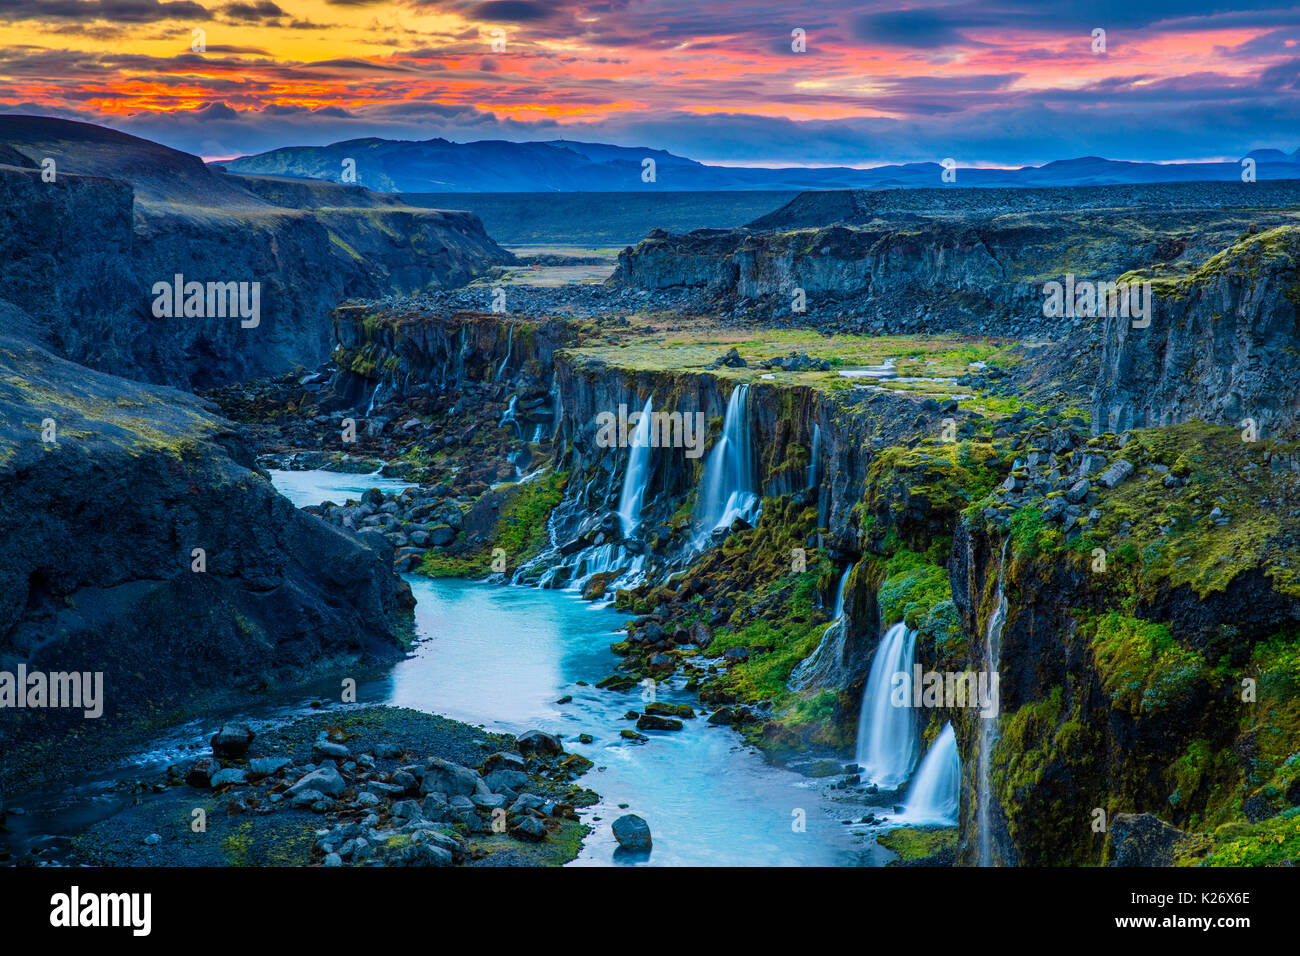 Canyon with multiple waterfalls in the Southern Region of Iceland Stock Photo